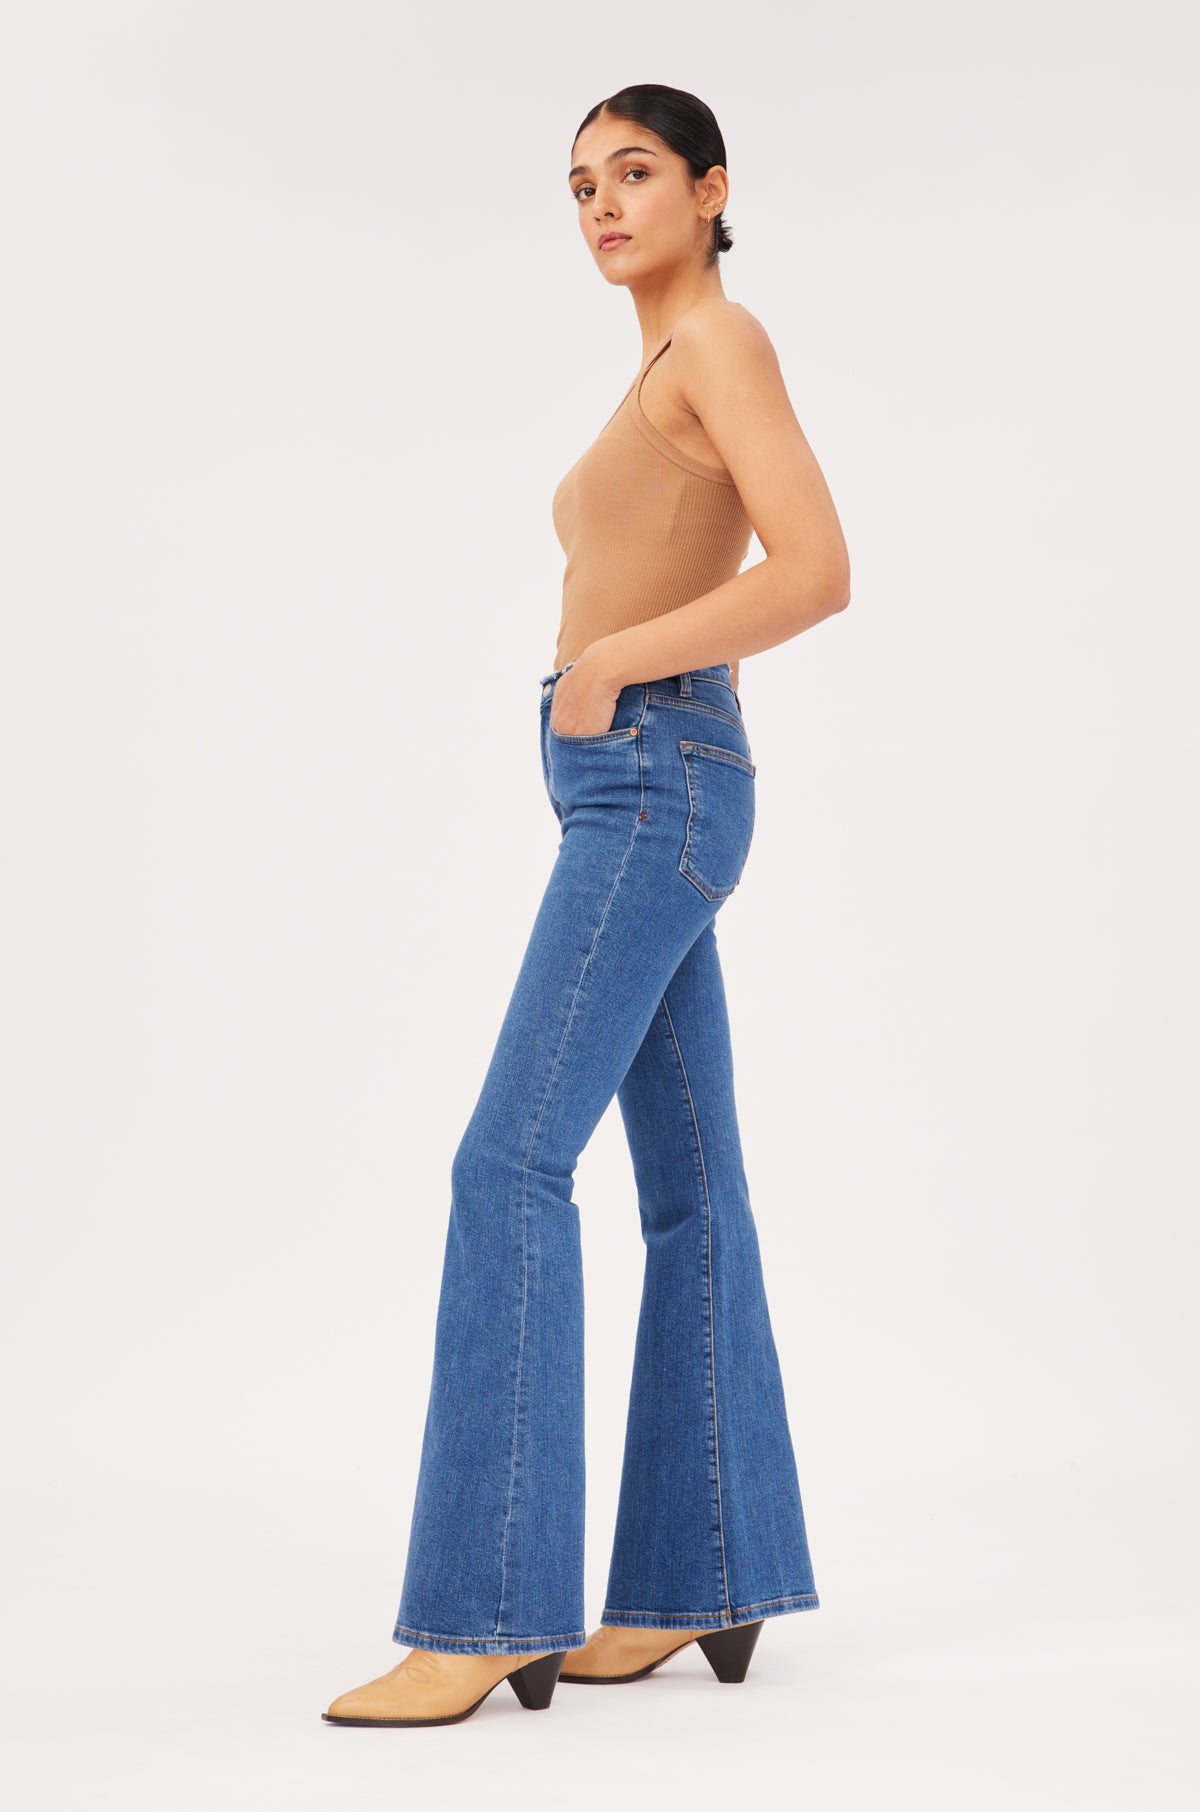 Warp + Weft Has Sustainable Denim for Under $100 Up to a 3X | Who What Wear